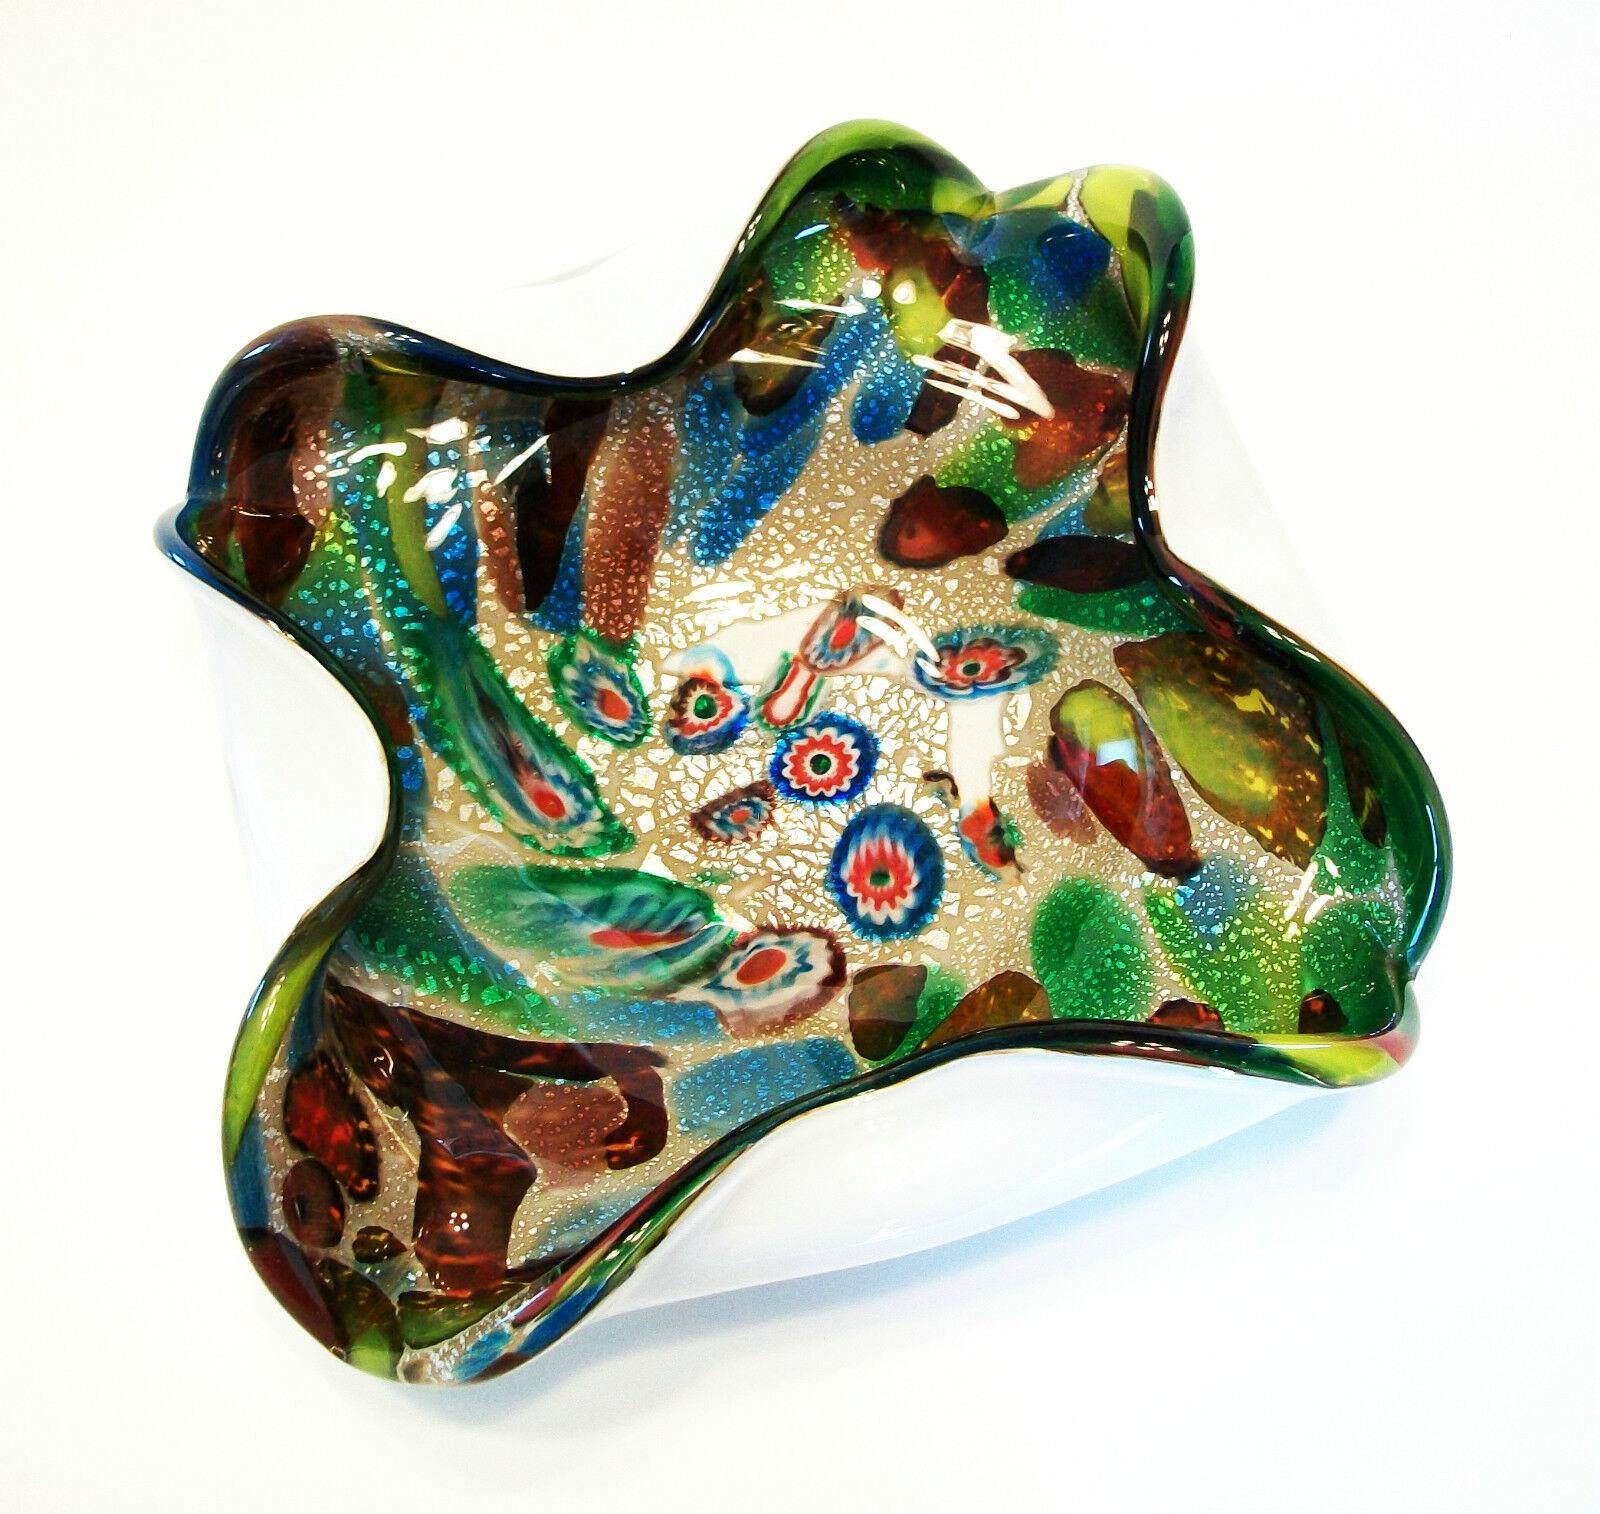 Mid-Century Modern Avem, Murano Millefiori Glass Bowl with Inclusions, Italy, Mid-20th Century